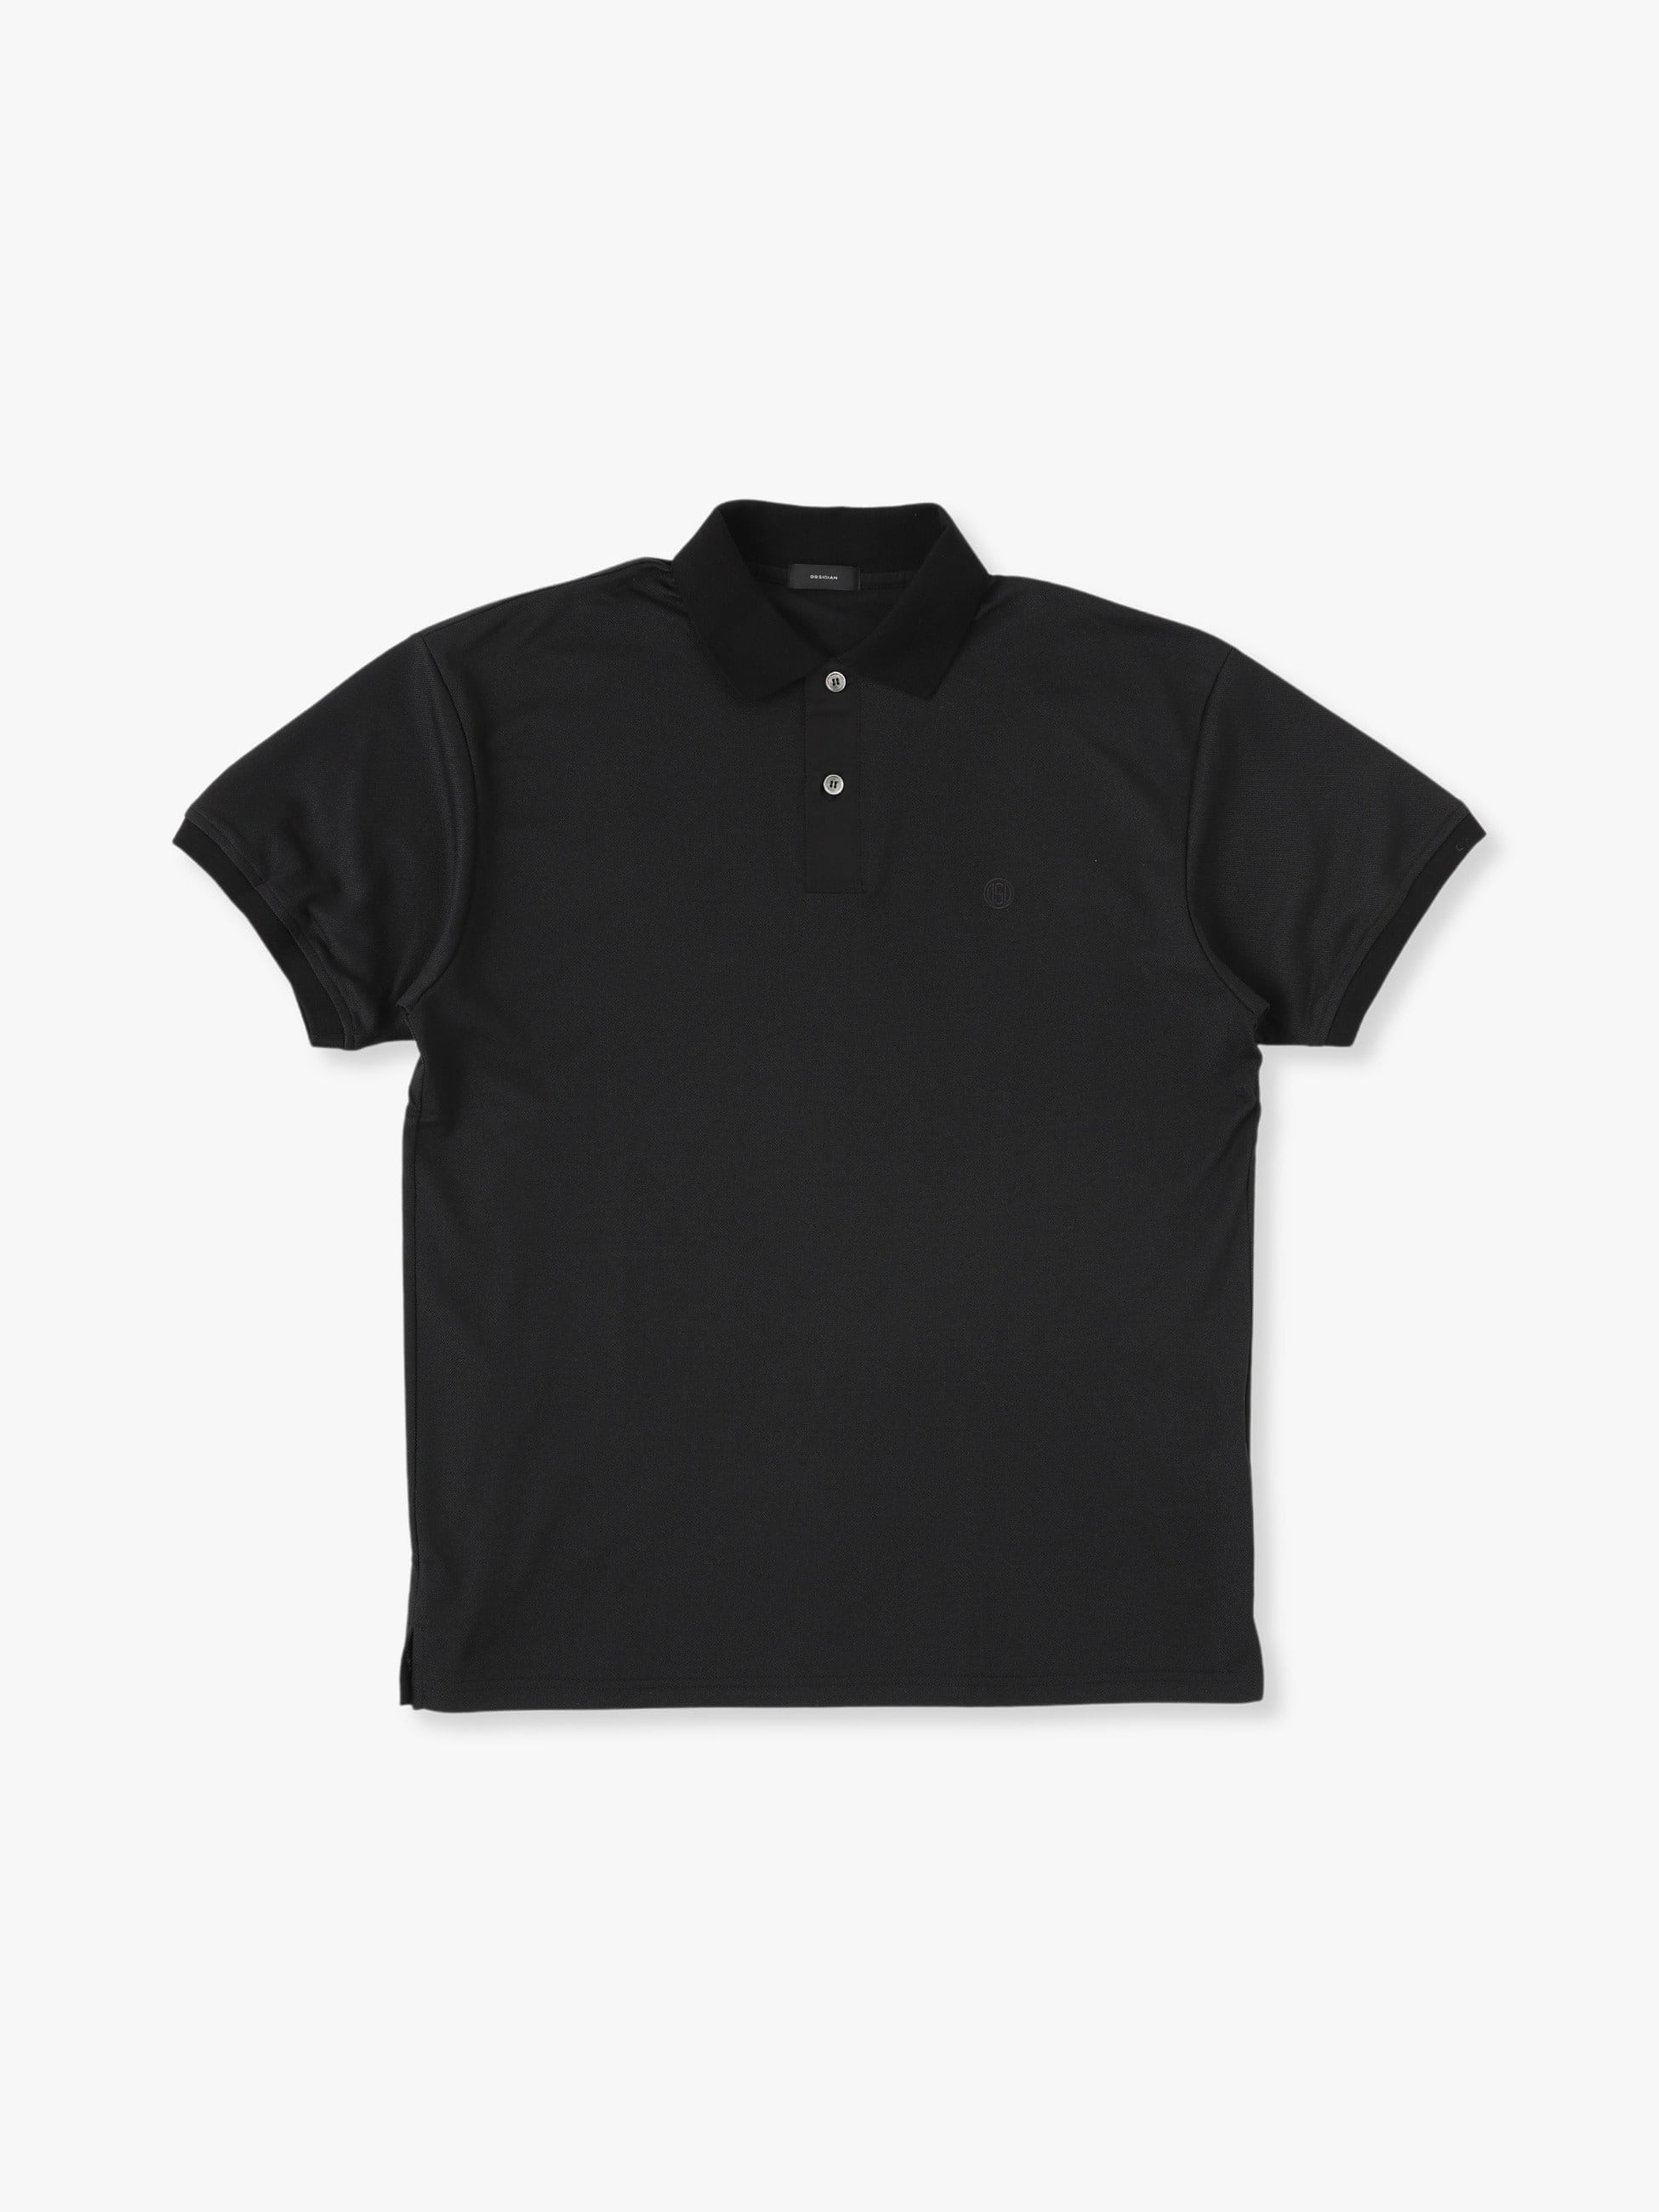 Reguler Fit Polo Shirt 詳細画像 other 1